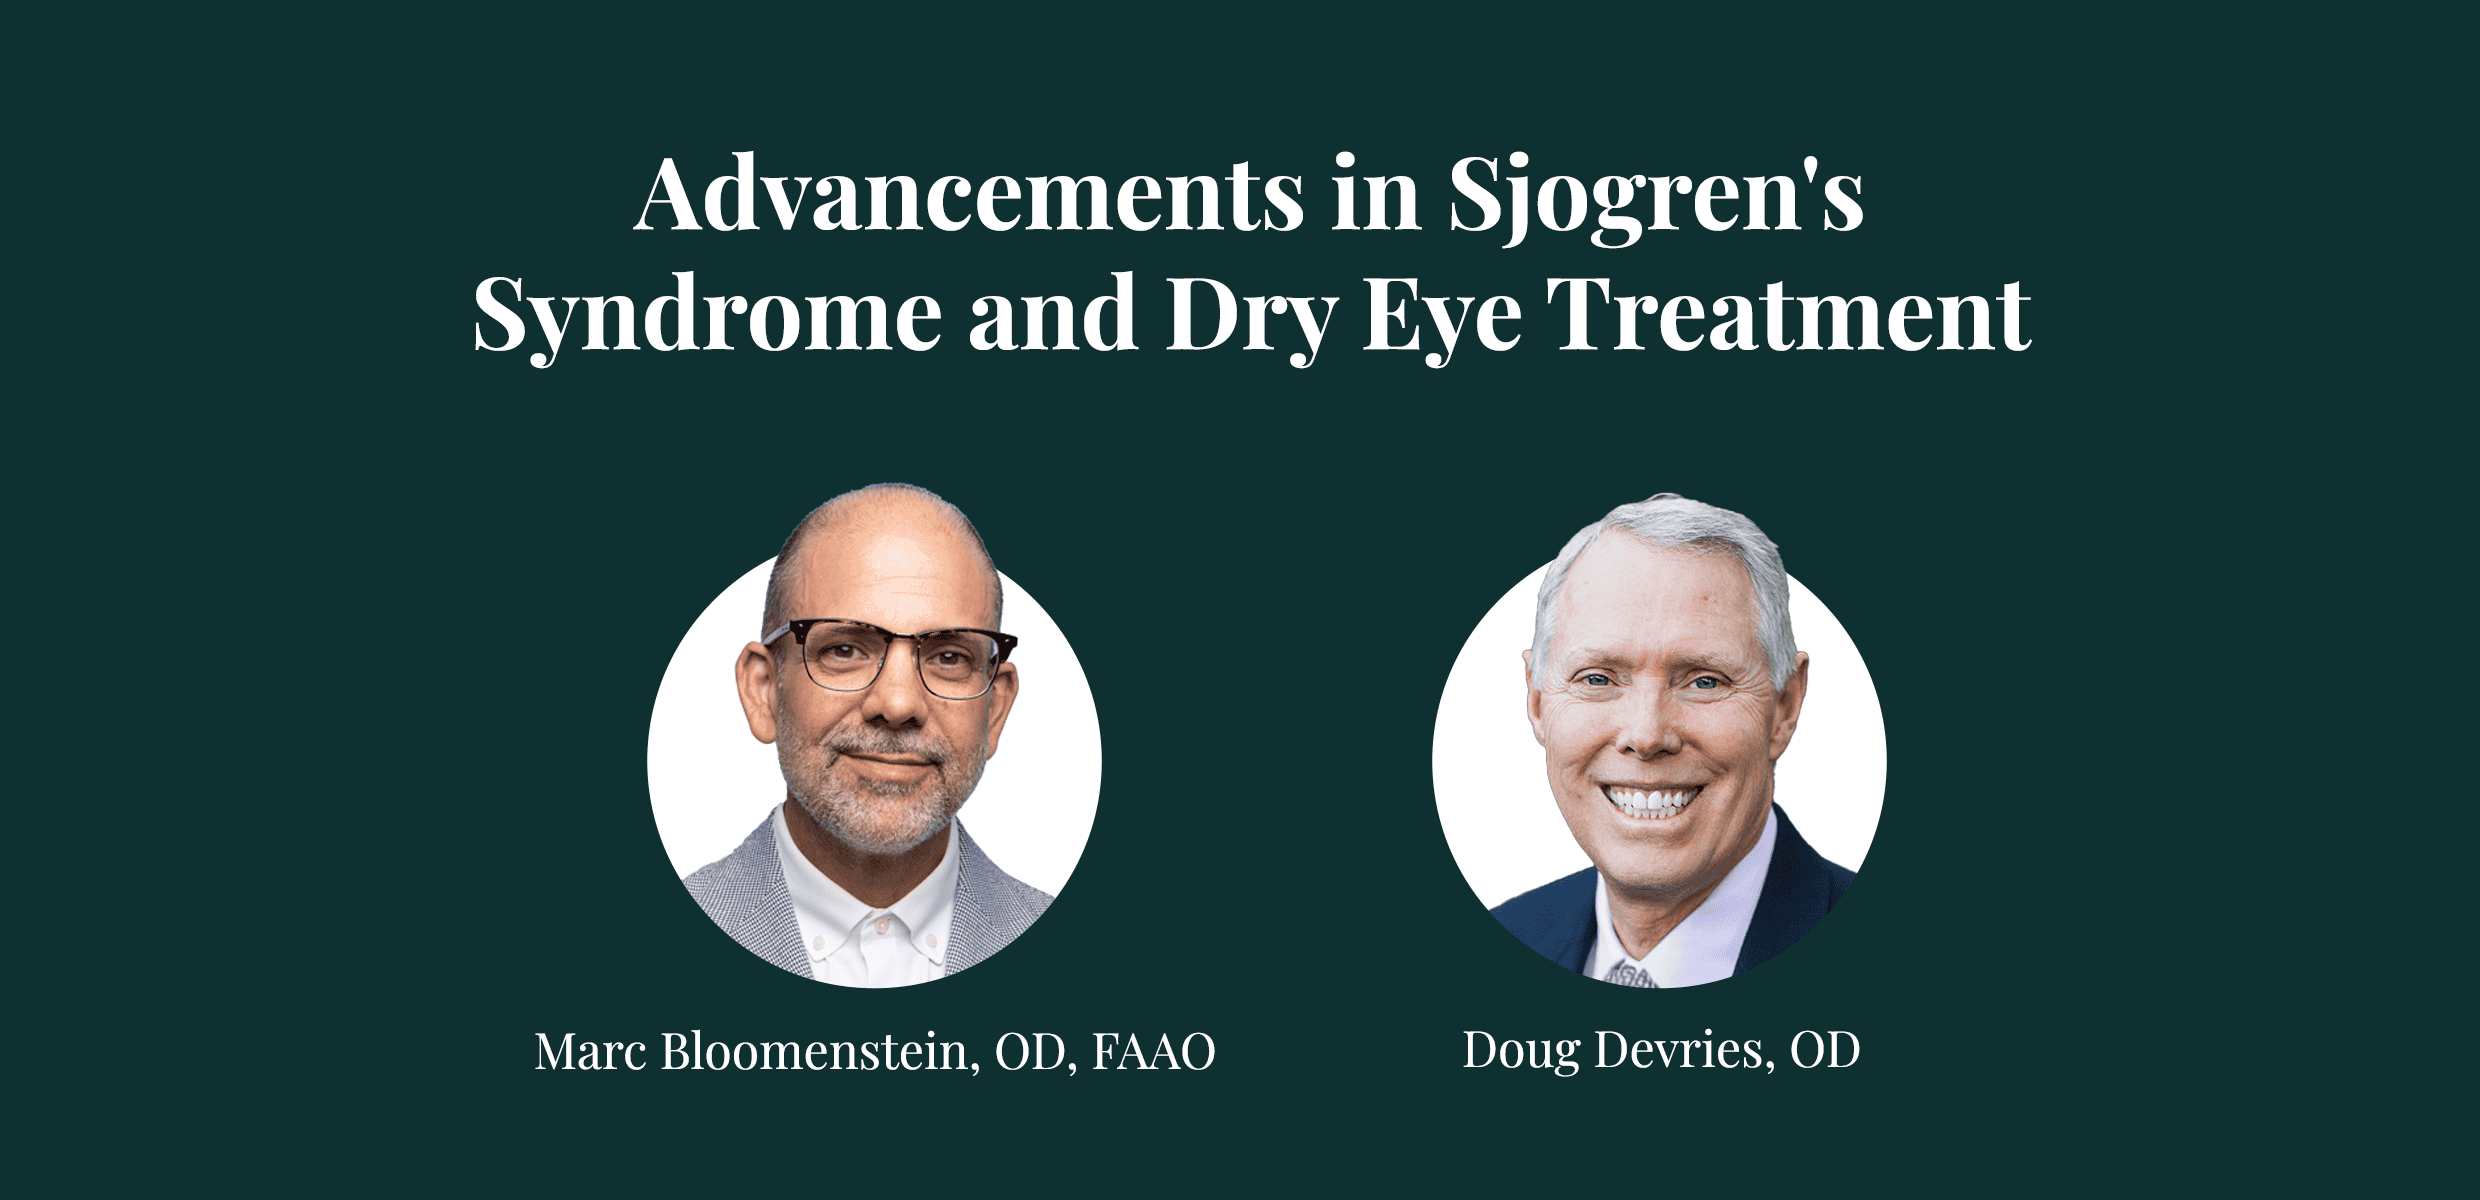 Advancements in Sjogren’s Syndrome and Dry Eye Treatment